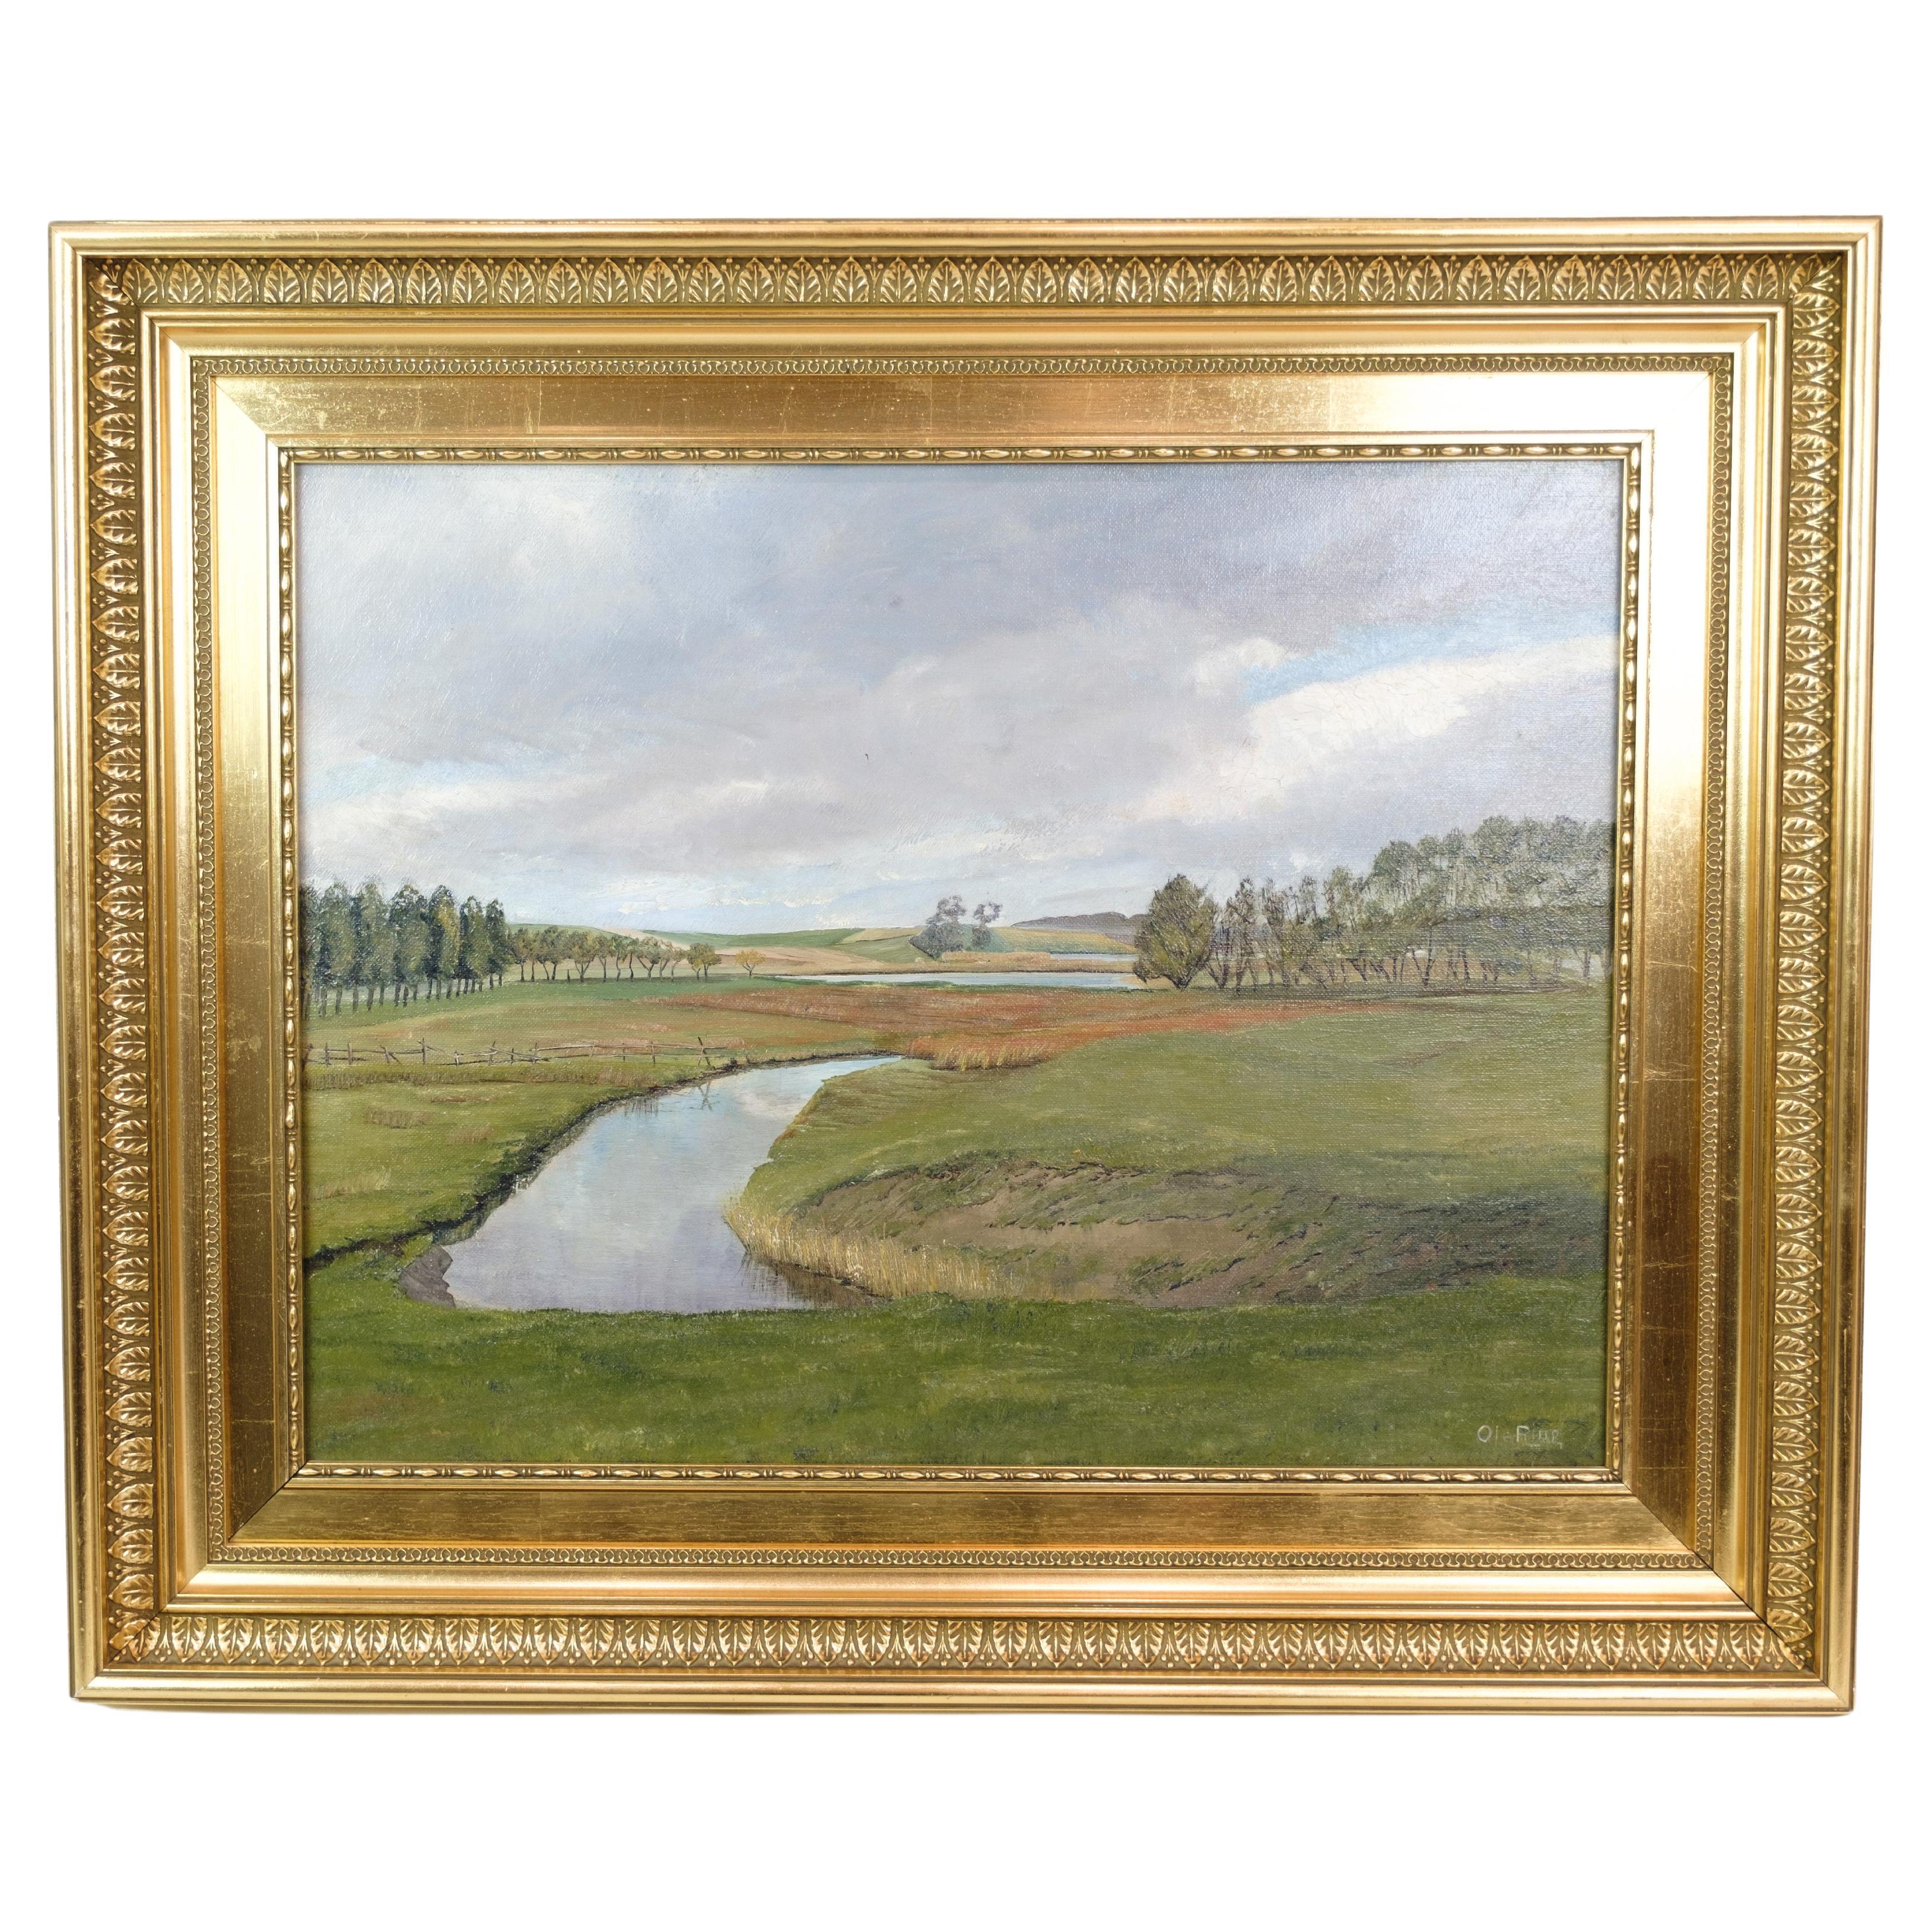 Landscape painting with gold leaf frame painted by Ole Ring (b.1902-d.1972)